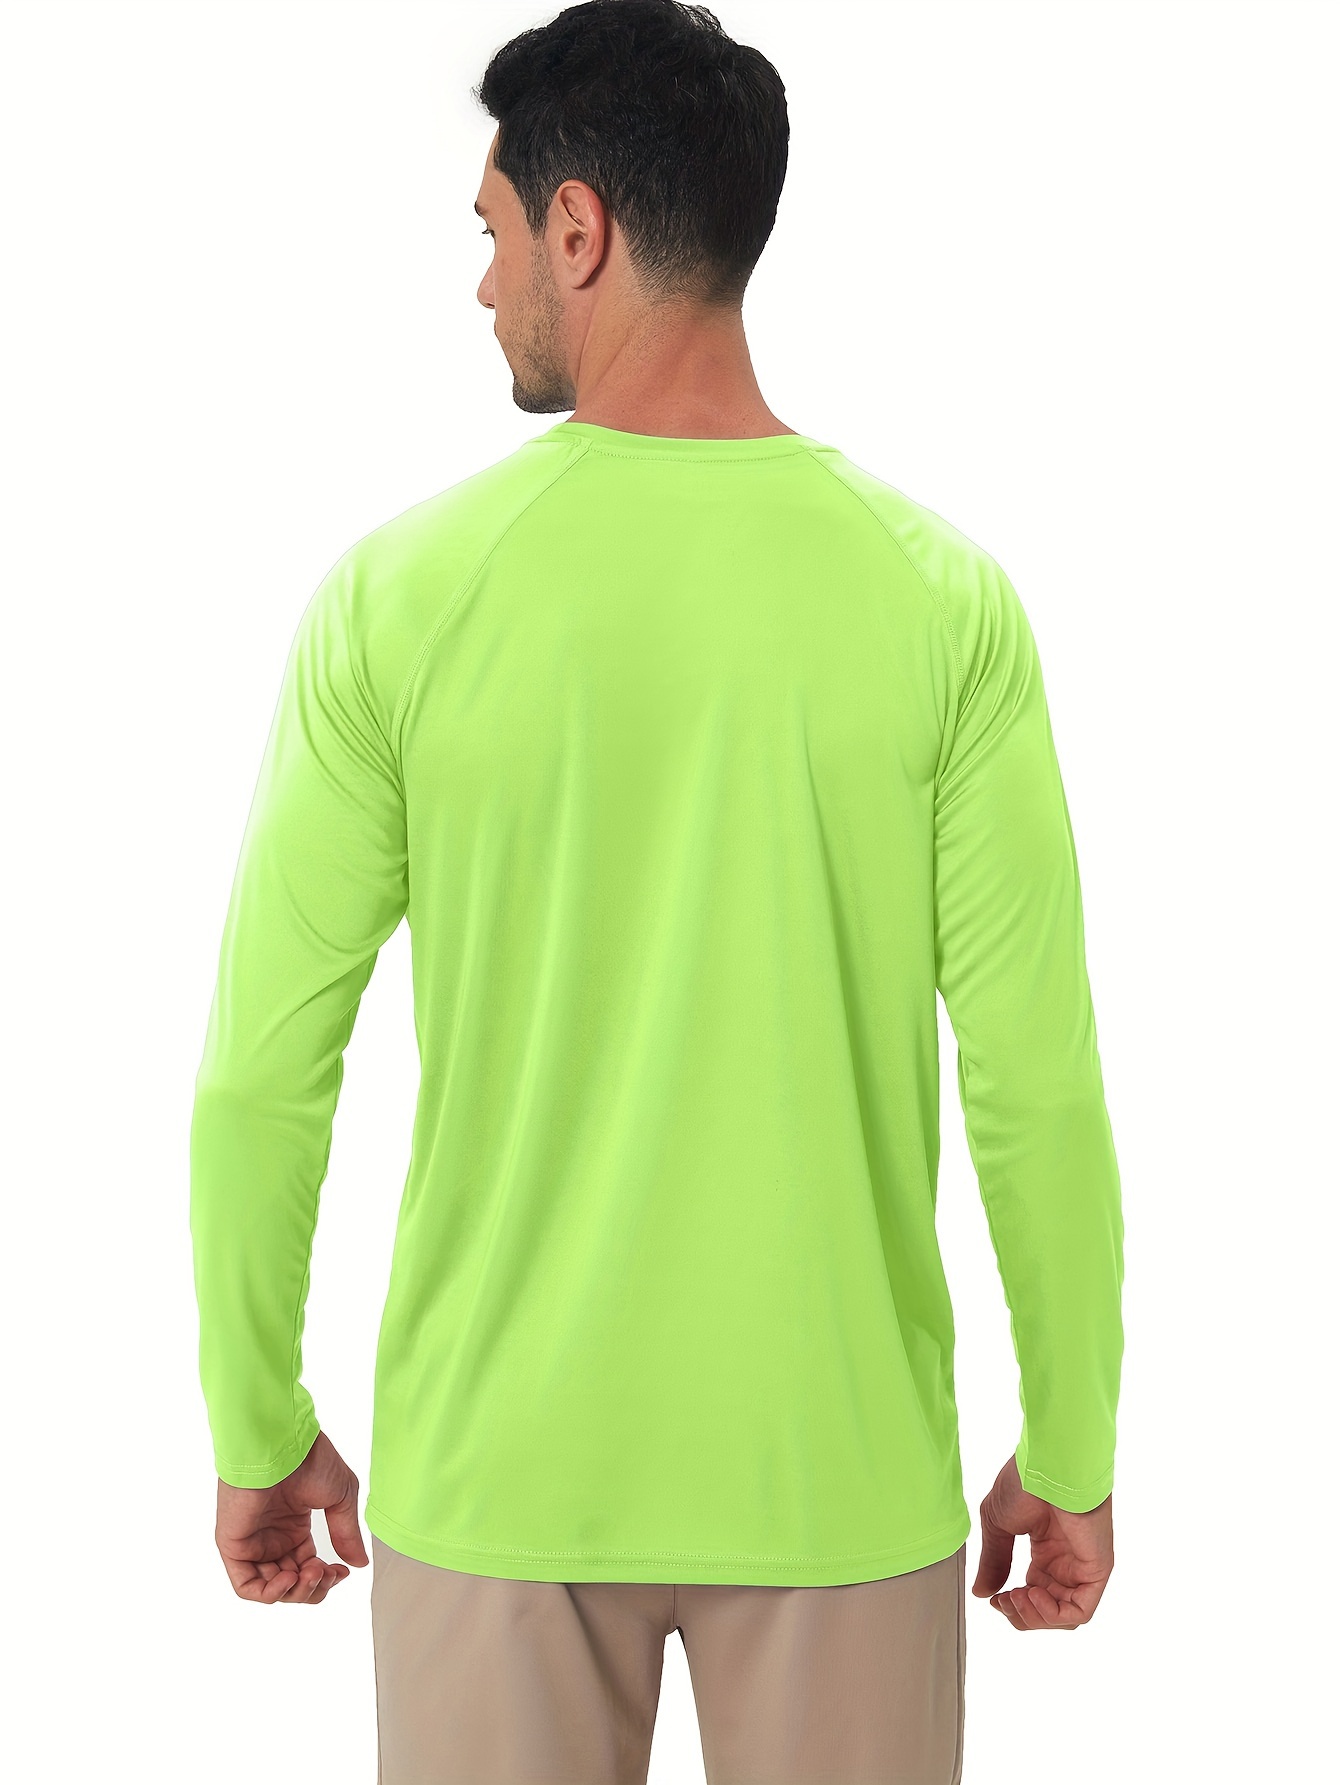 Men's UPF 50+ Sun Protection Shirt, Active Quick Dry Slightly Stretch  Breathable Long Sleeve Rash Guard For Fishing Running Outdoor